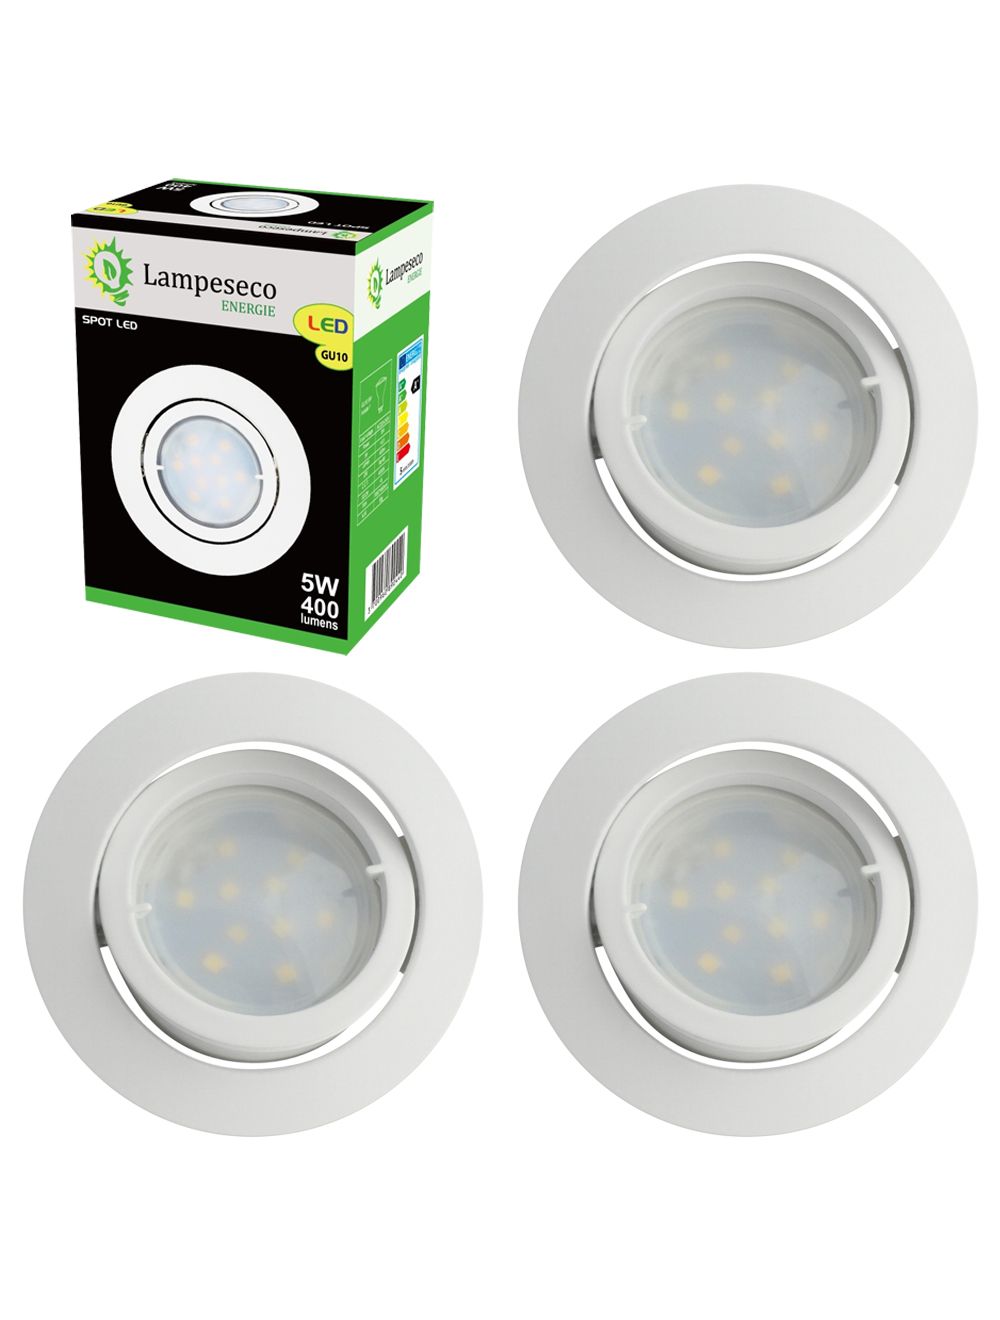 Spot LED Star Blanc Ronde inclinable 5W 450lm 60D - 840 Blanc